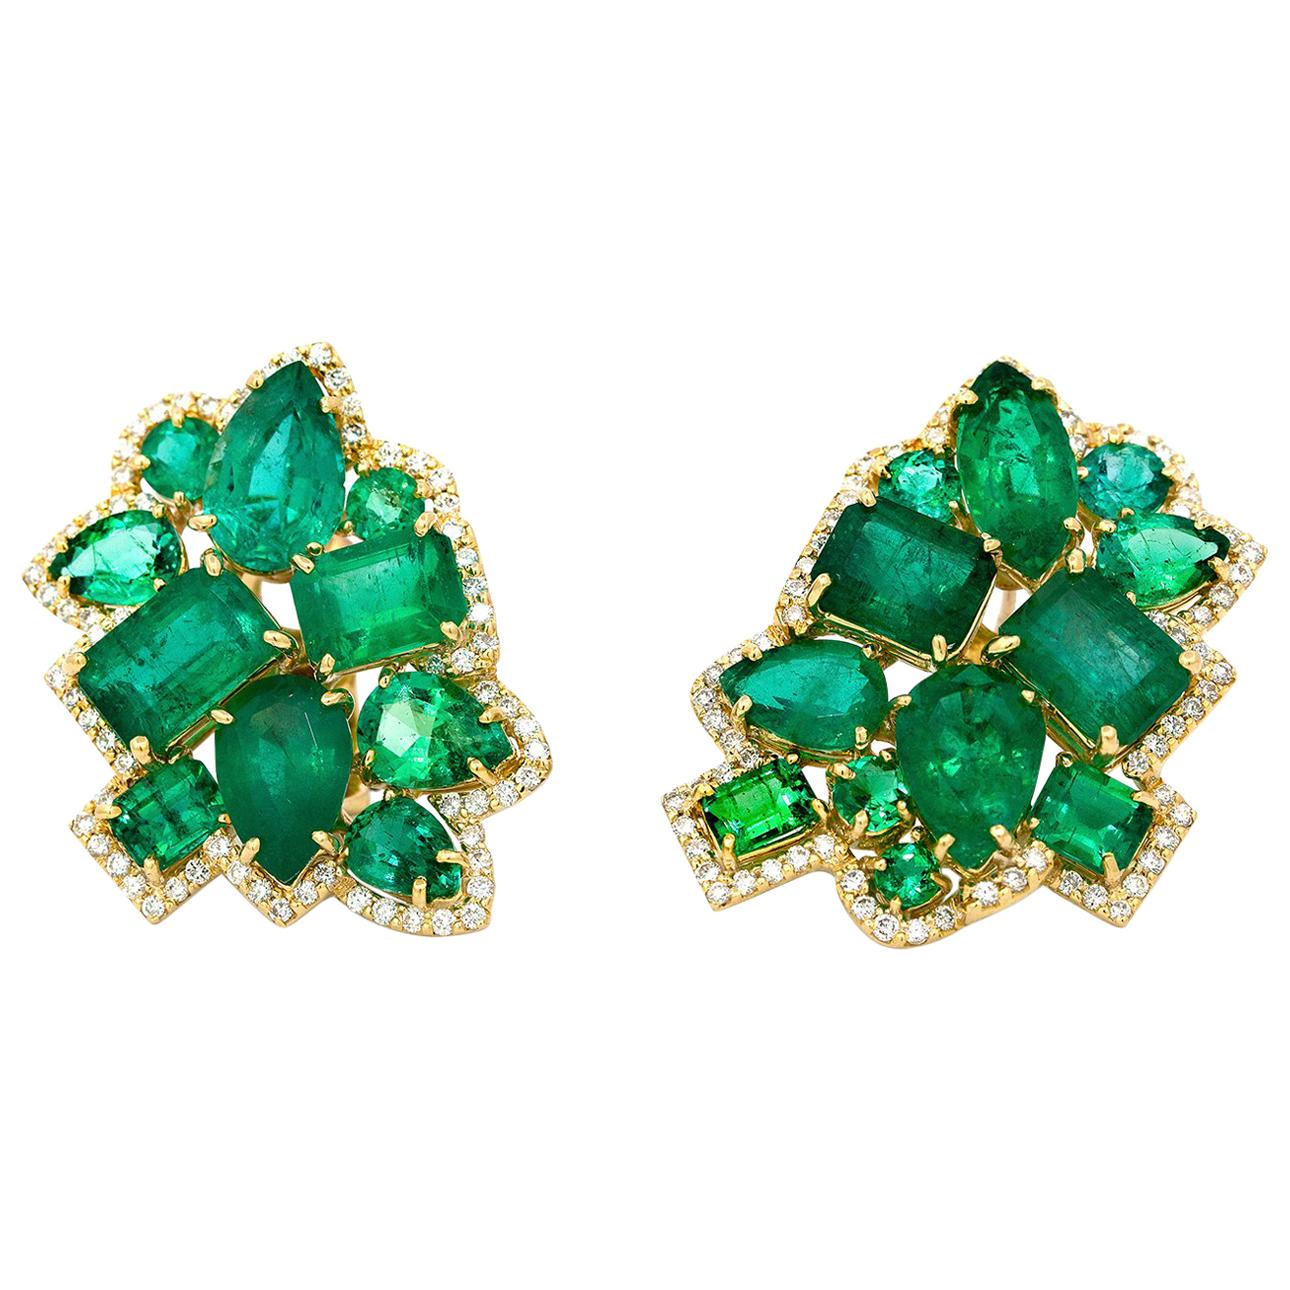 24.38 Carat of Emeralds and 1.92 Carat of Diamonds Modern Geometric Earrings For Sale